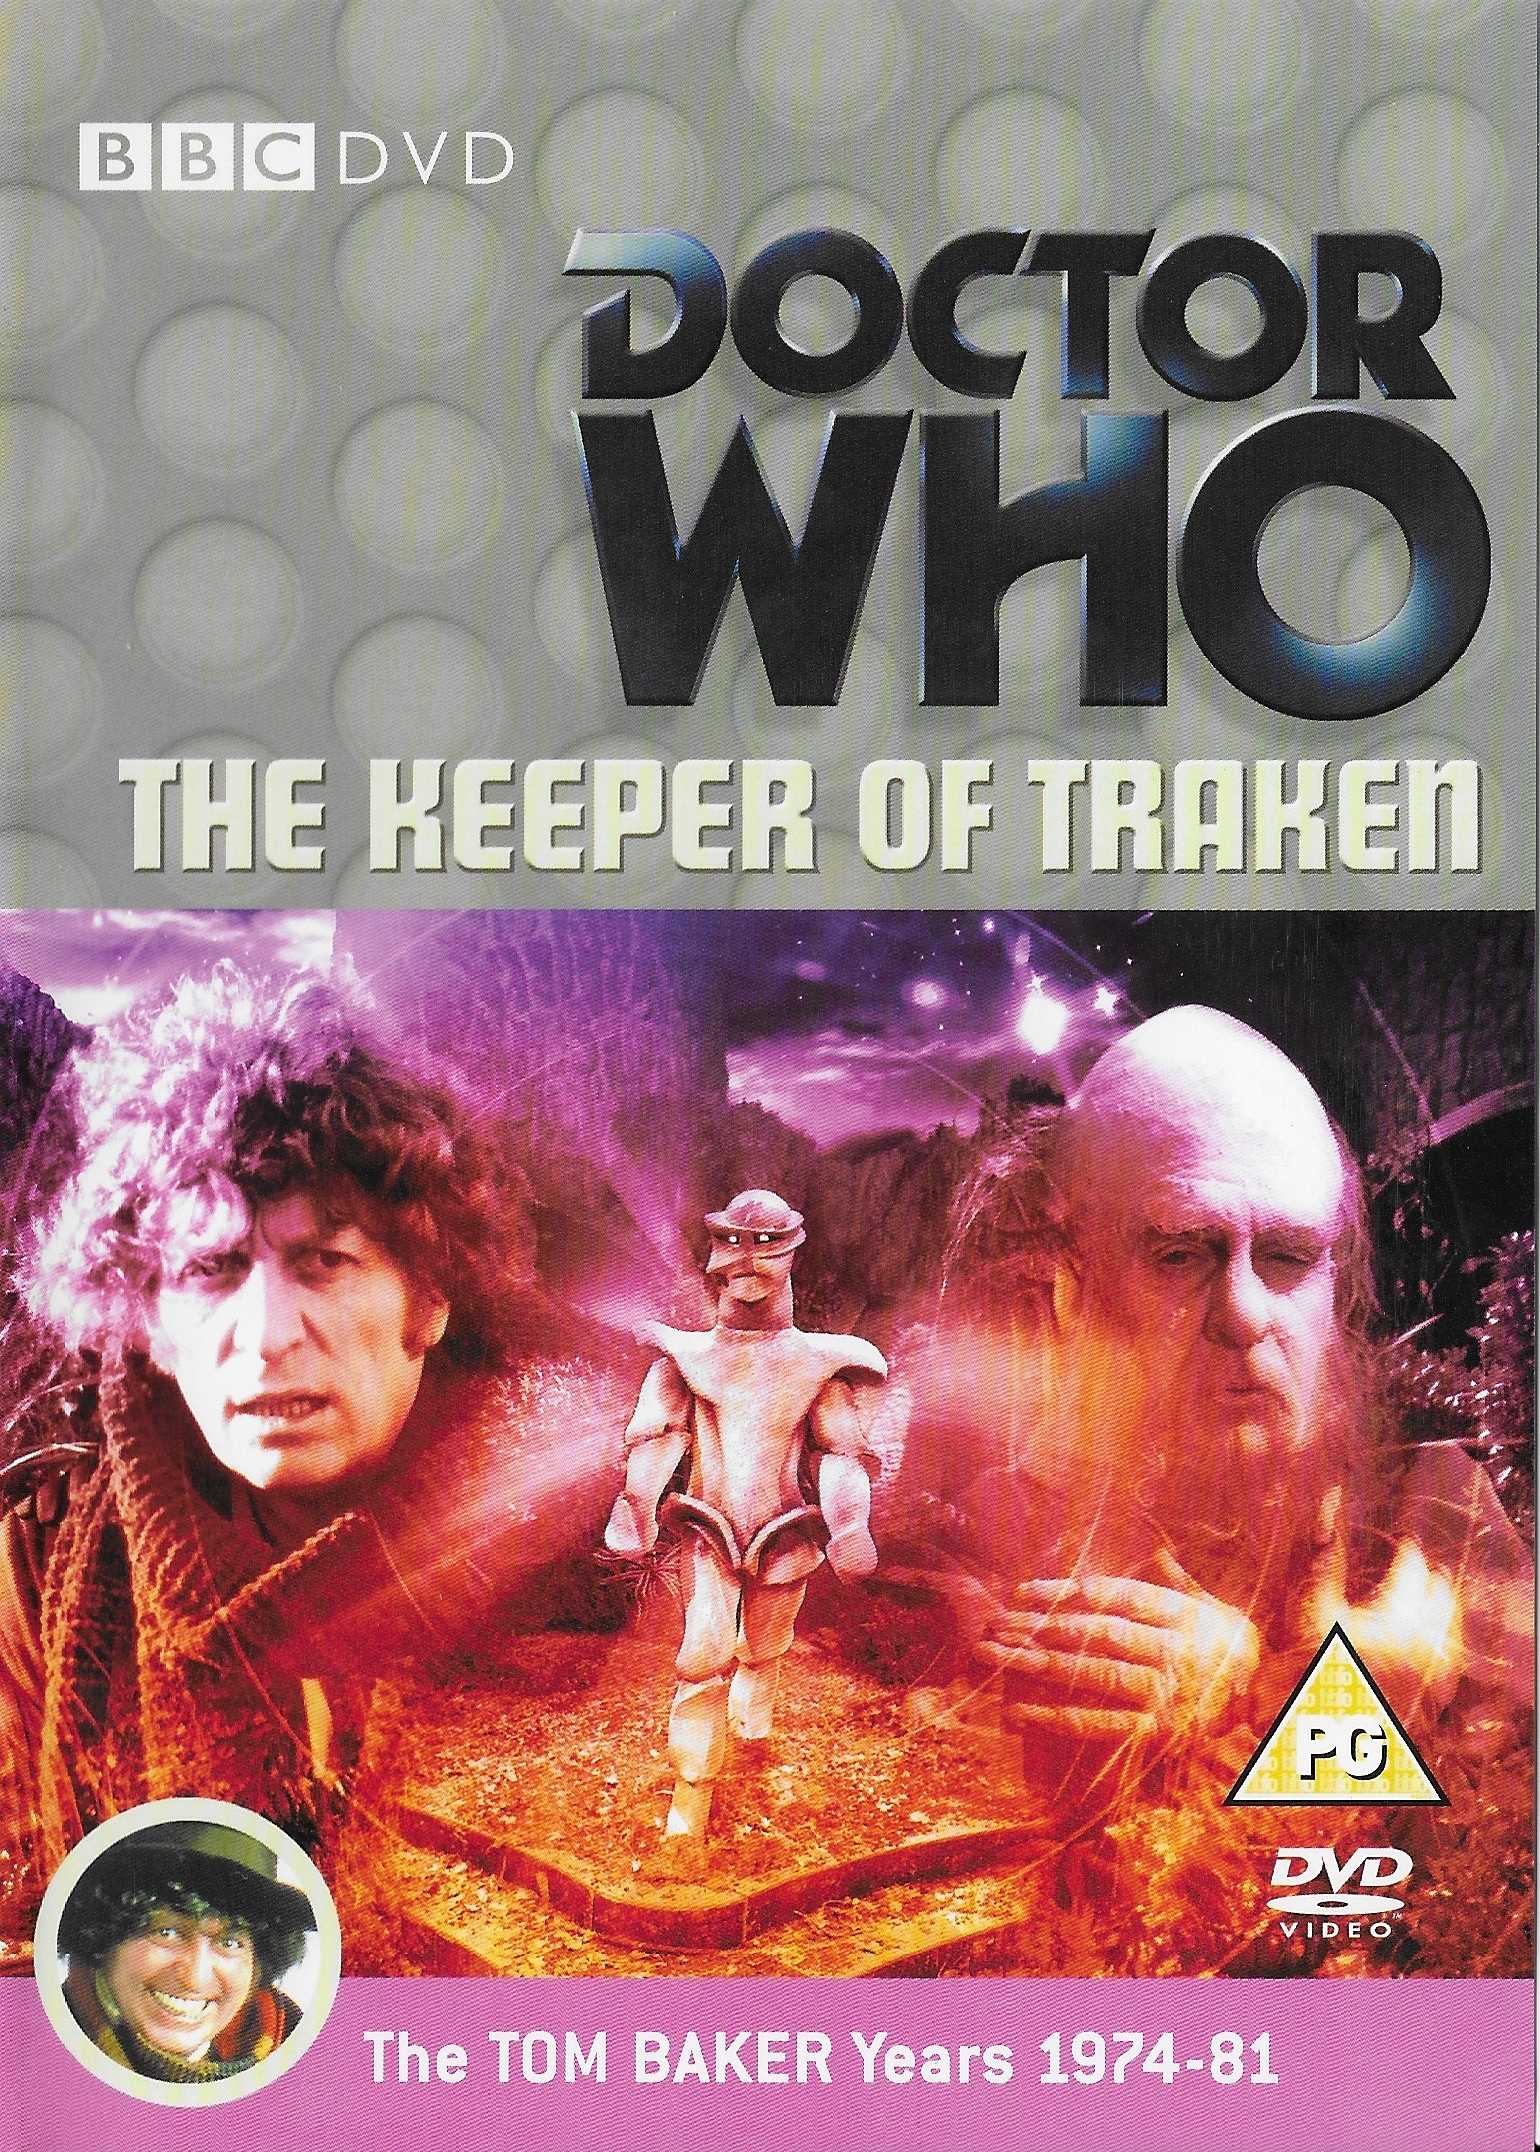 Picture of BBCDVD 1331A Doctor Who - The keeper of Tracken by artist Johnny Byrne from the BBC records and Tapes library